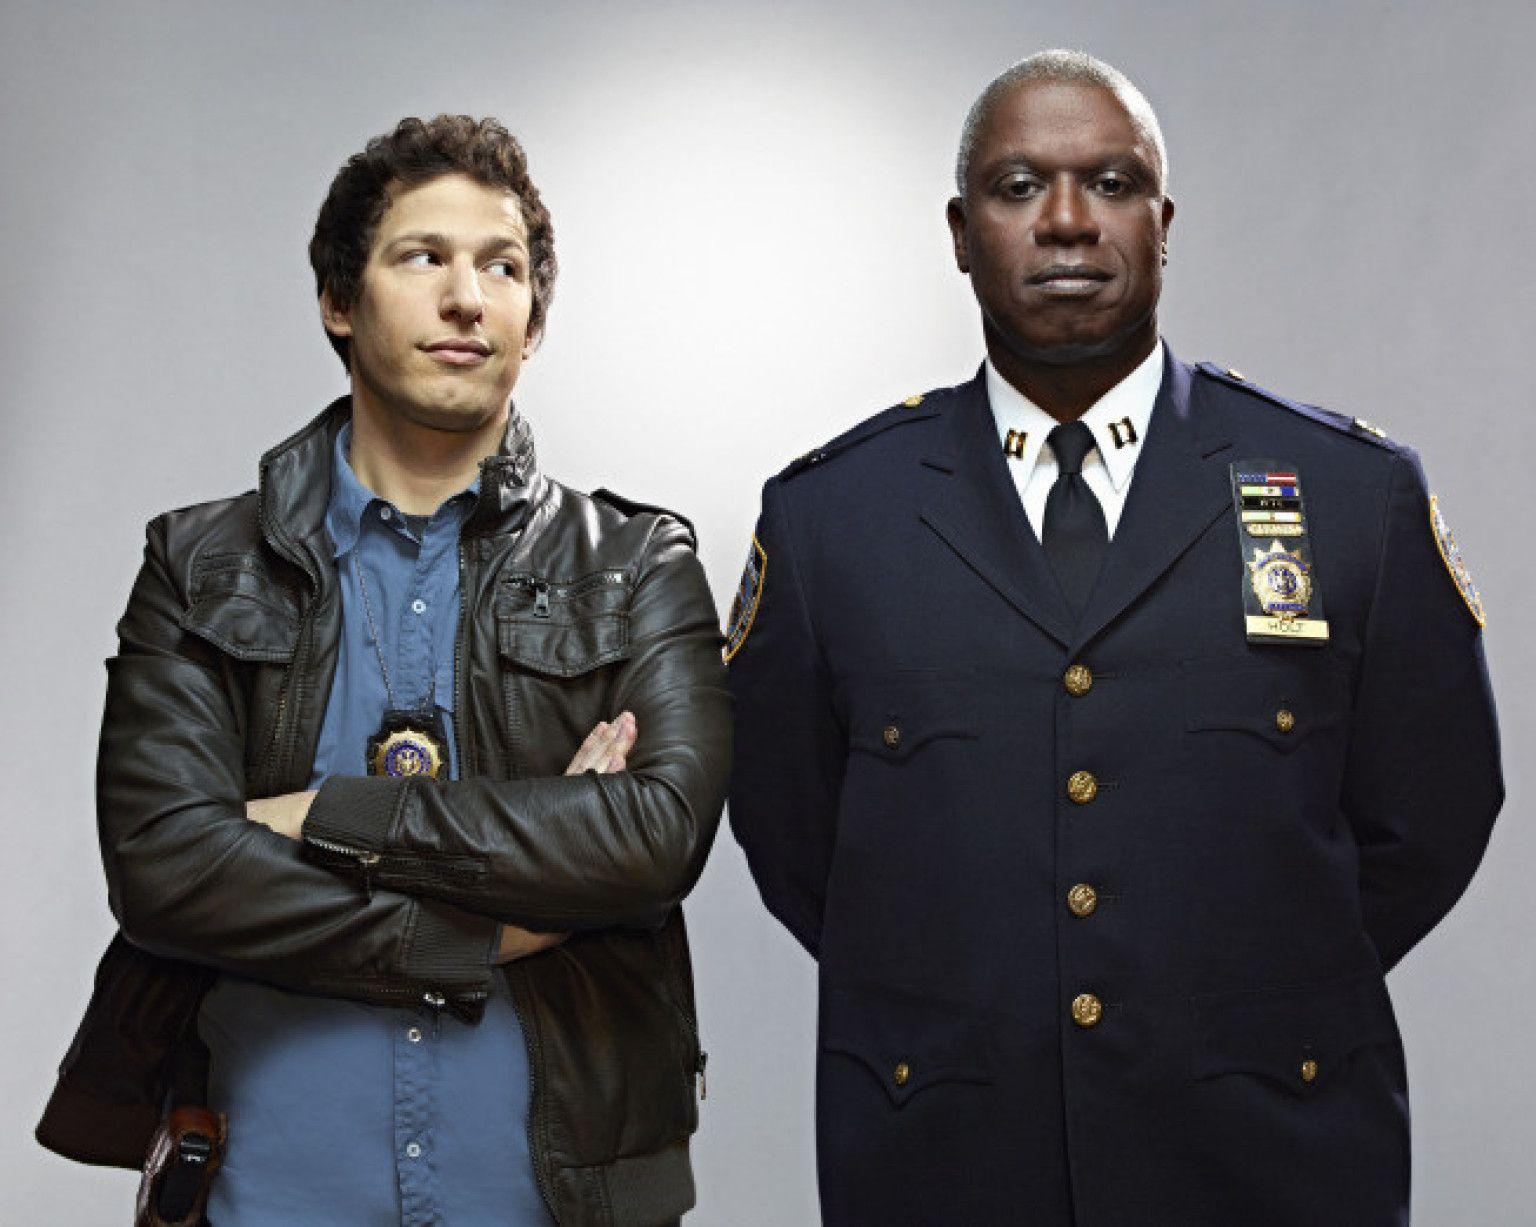 Brooklyn Nine Nine' Review: Book These Cops On Suspicion Of Being